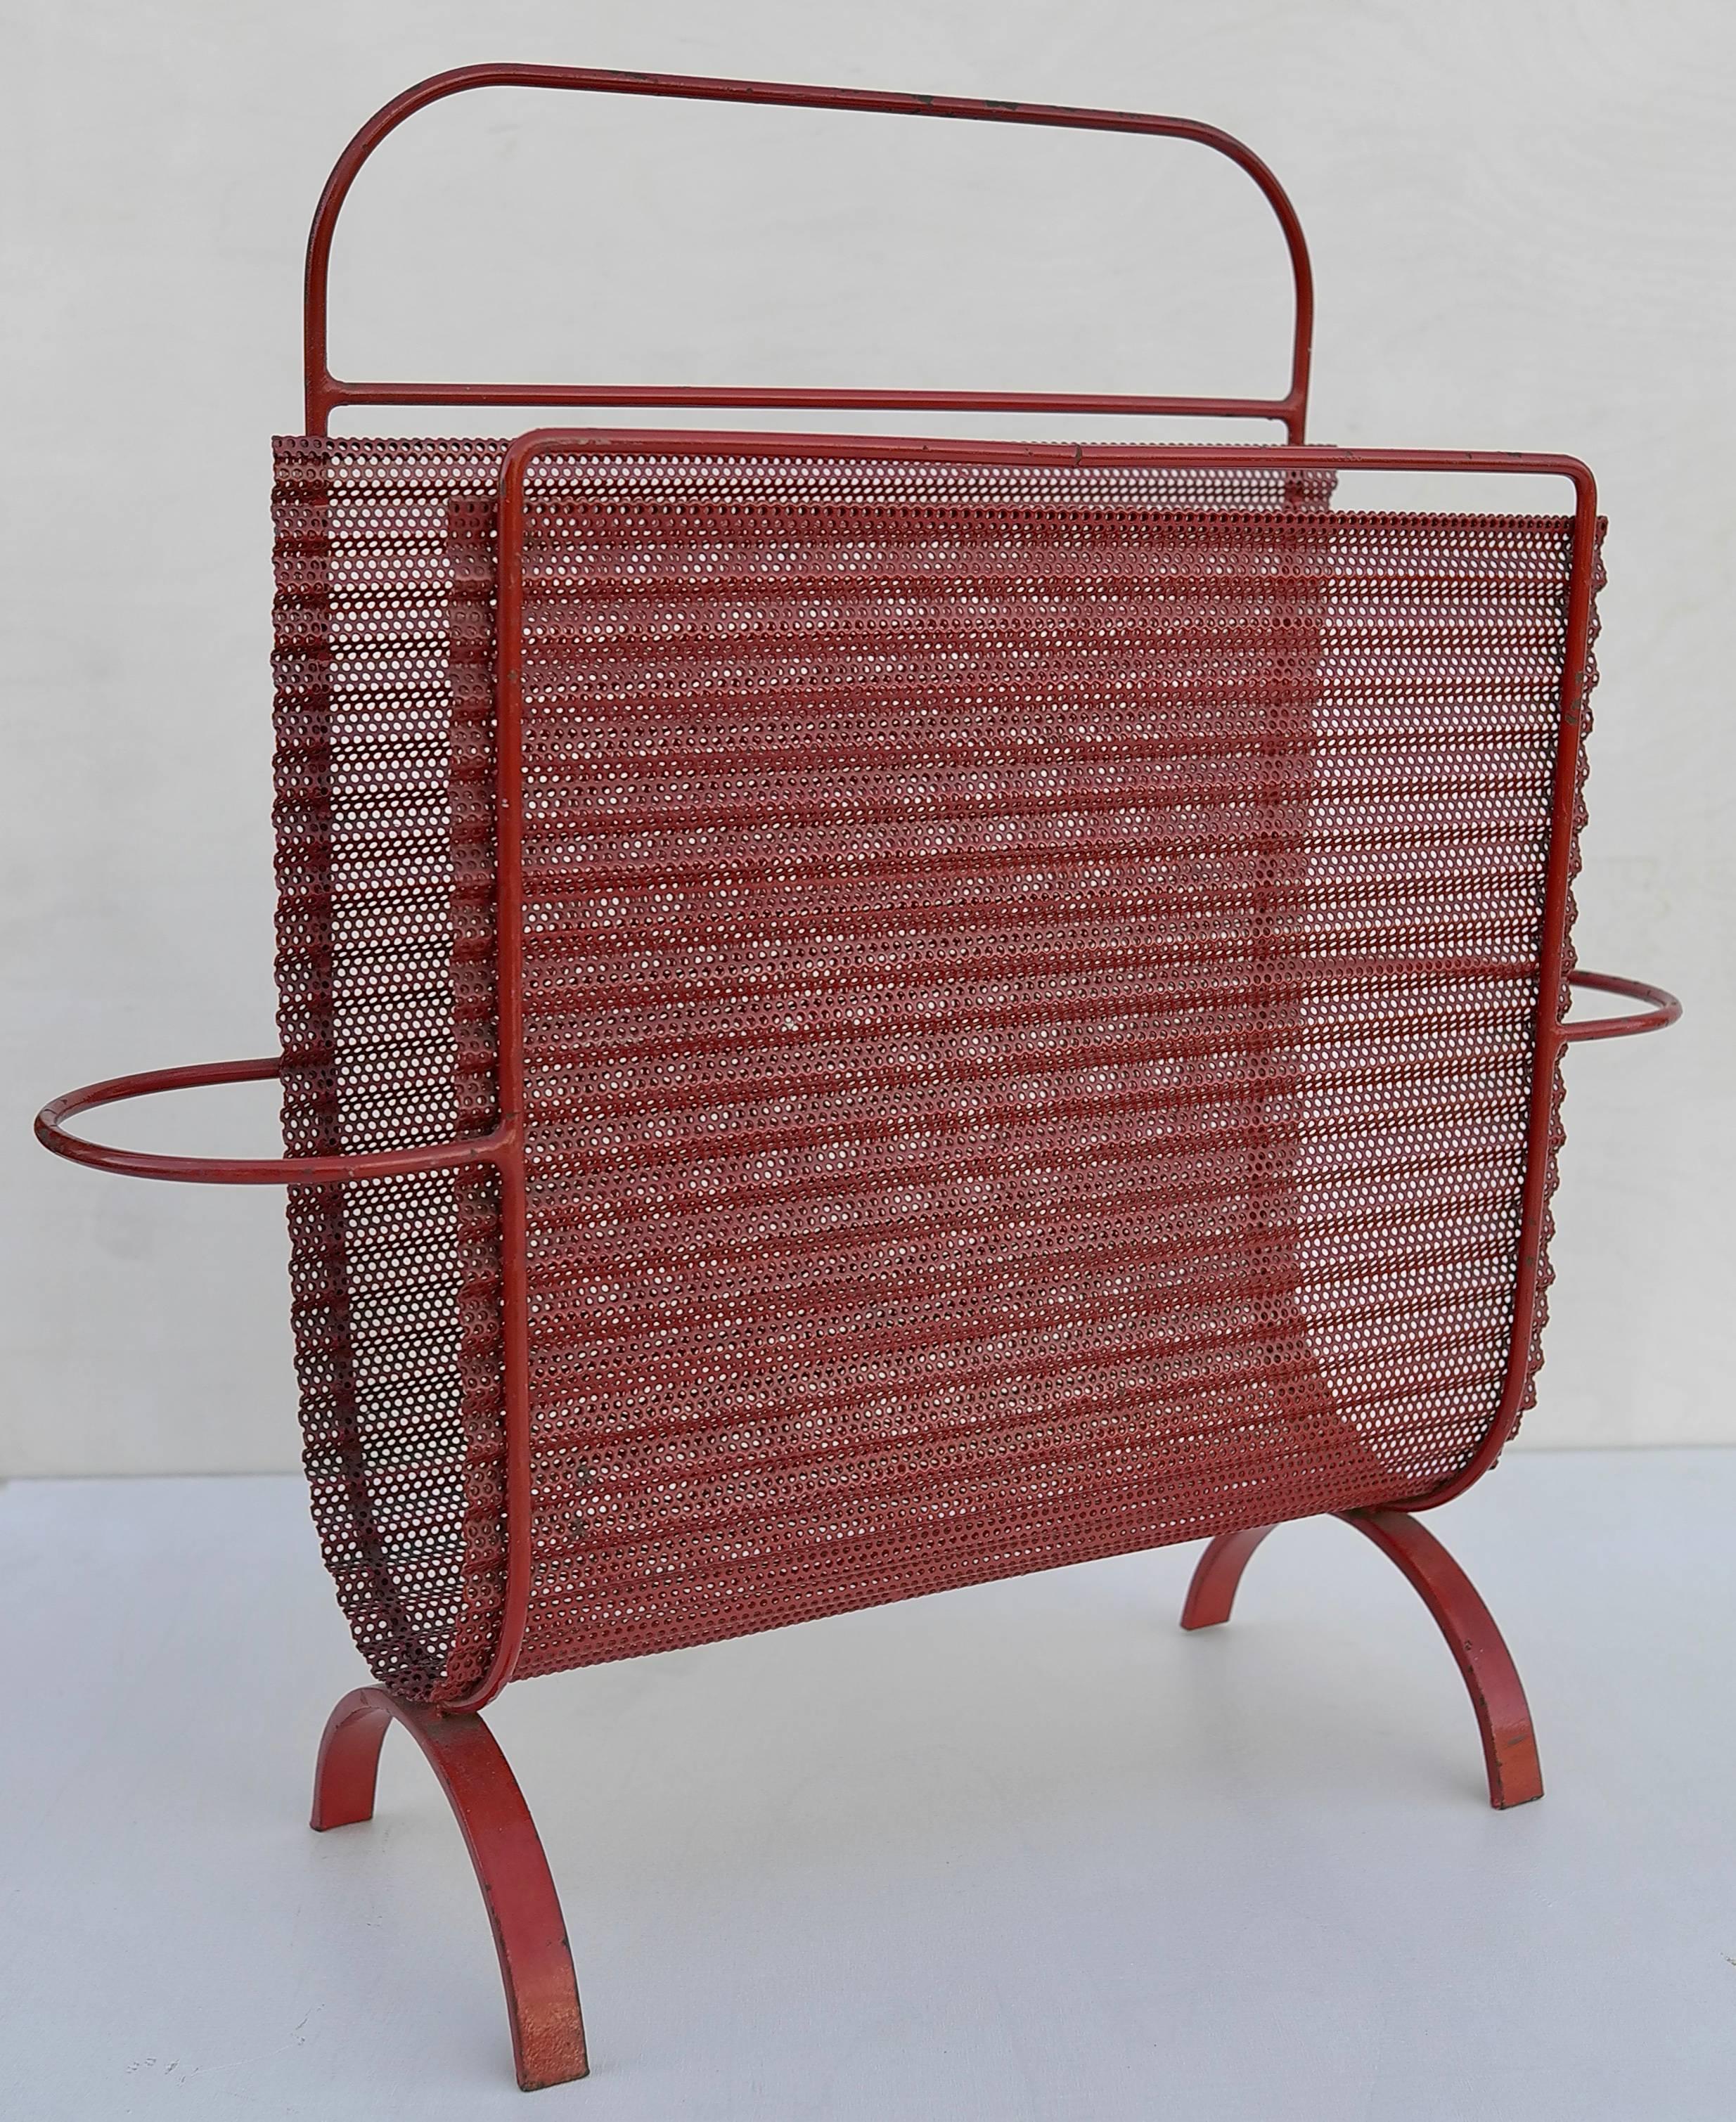 Magazine holder, model Harpers, designed by Mathieu Matégot, rare in red metal. Manufactured by Ateliers Matégot, circa 1950. Folded, perforated metal.